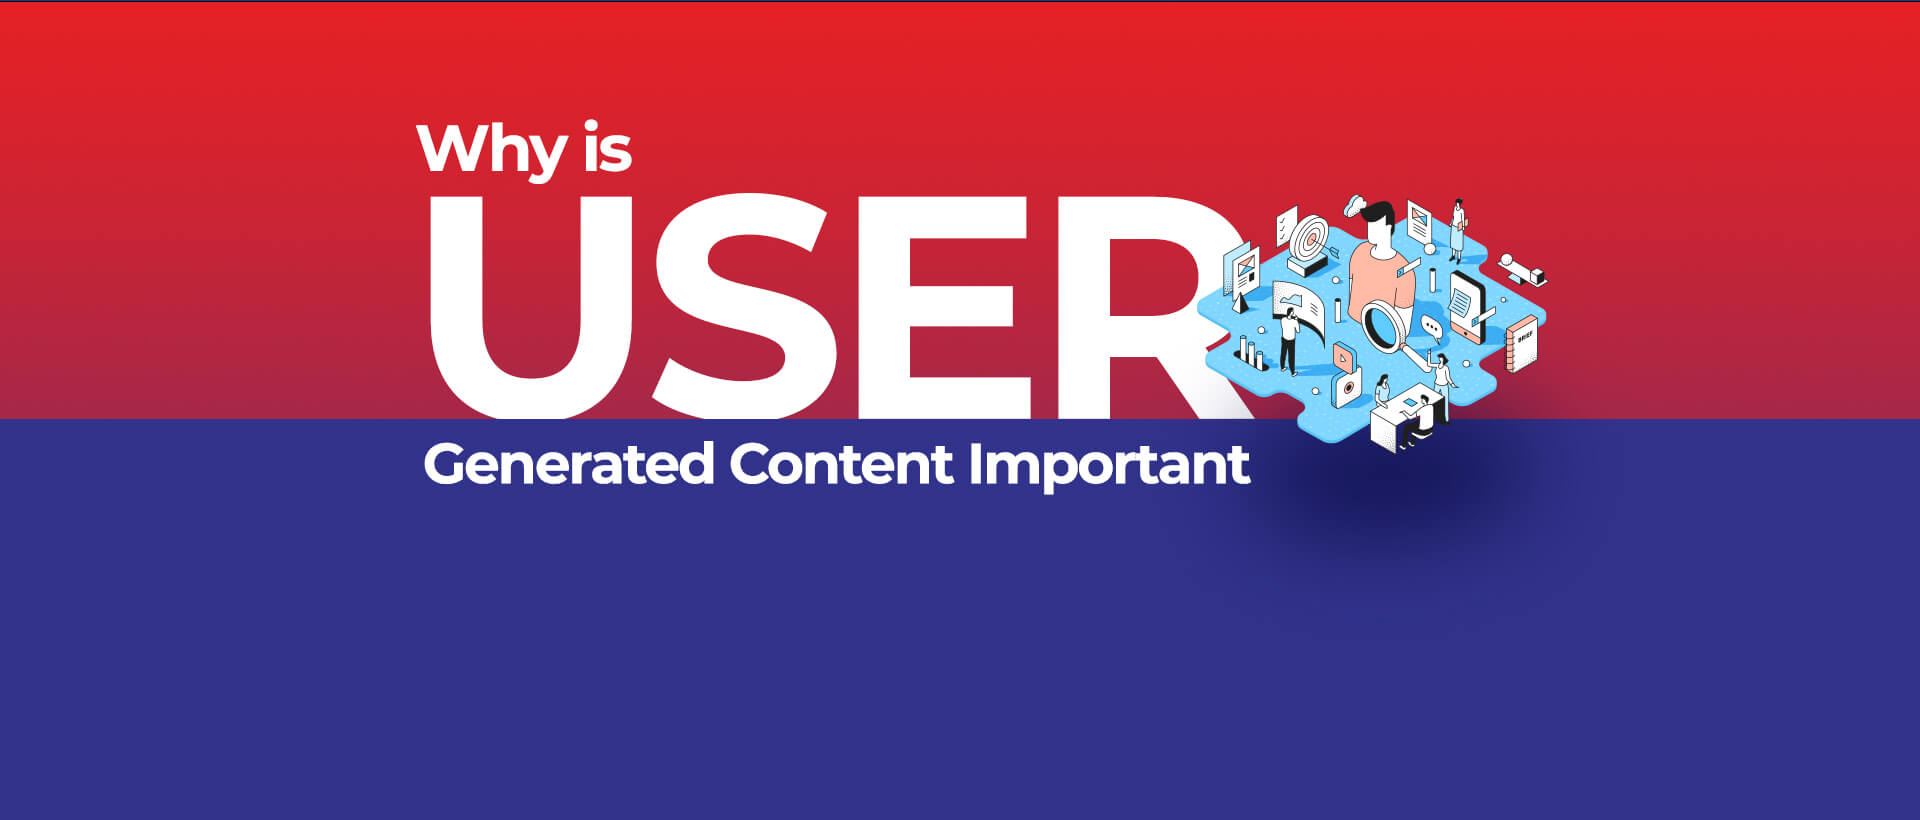 5 Reasons Why is User-Generated Content is Important